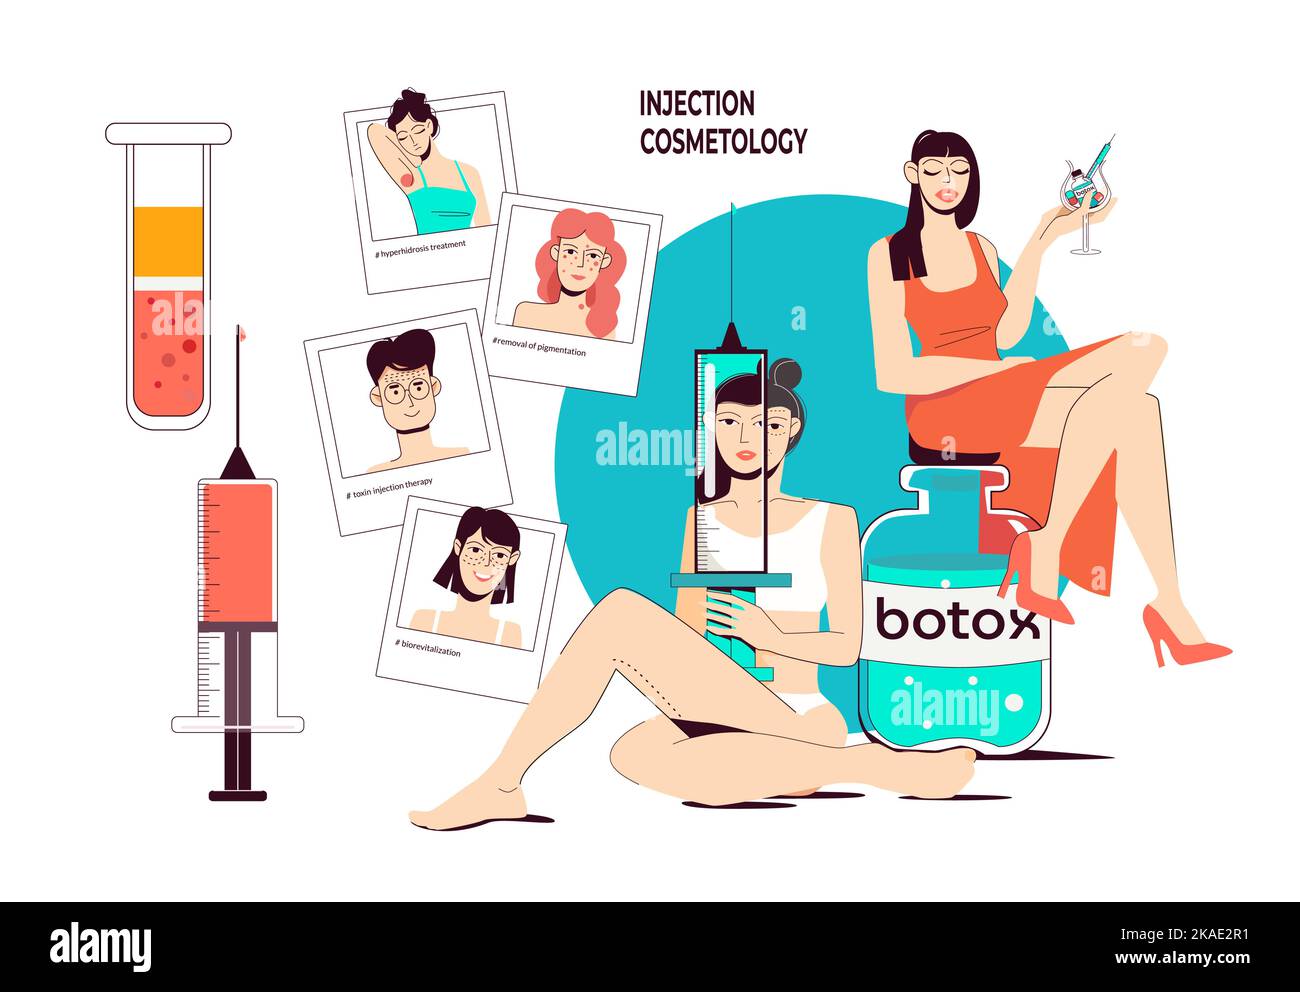 Injection cosmetology flat vector illustration with people having skin problems or improving face with beauty injections Stock Vector